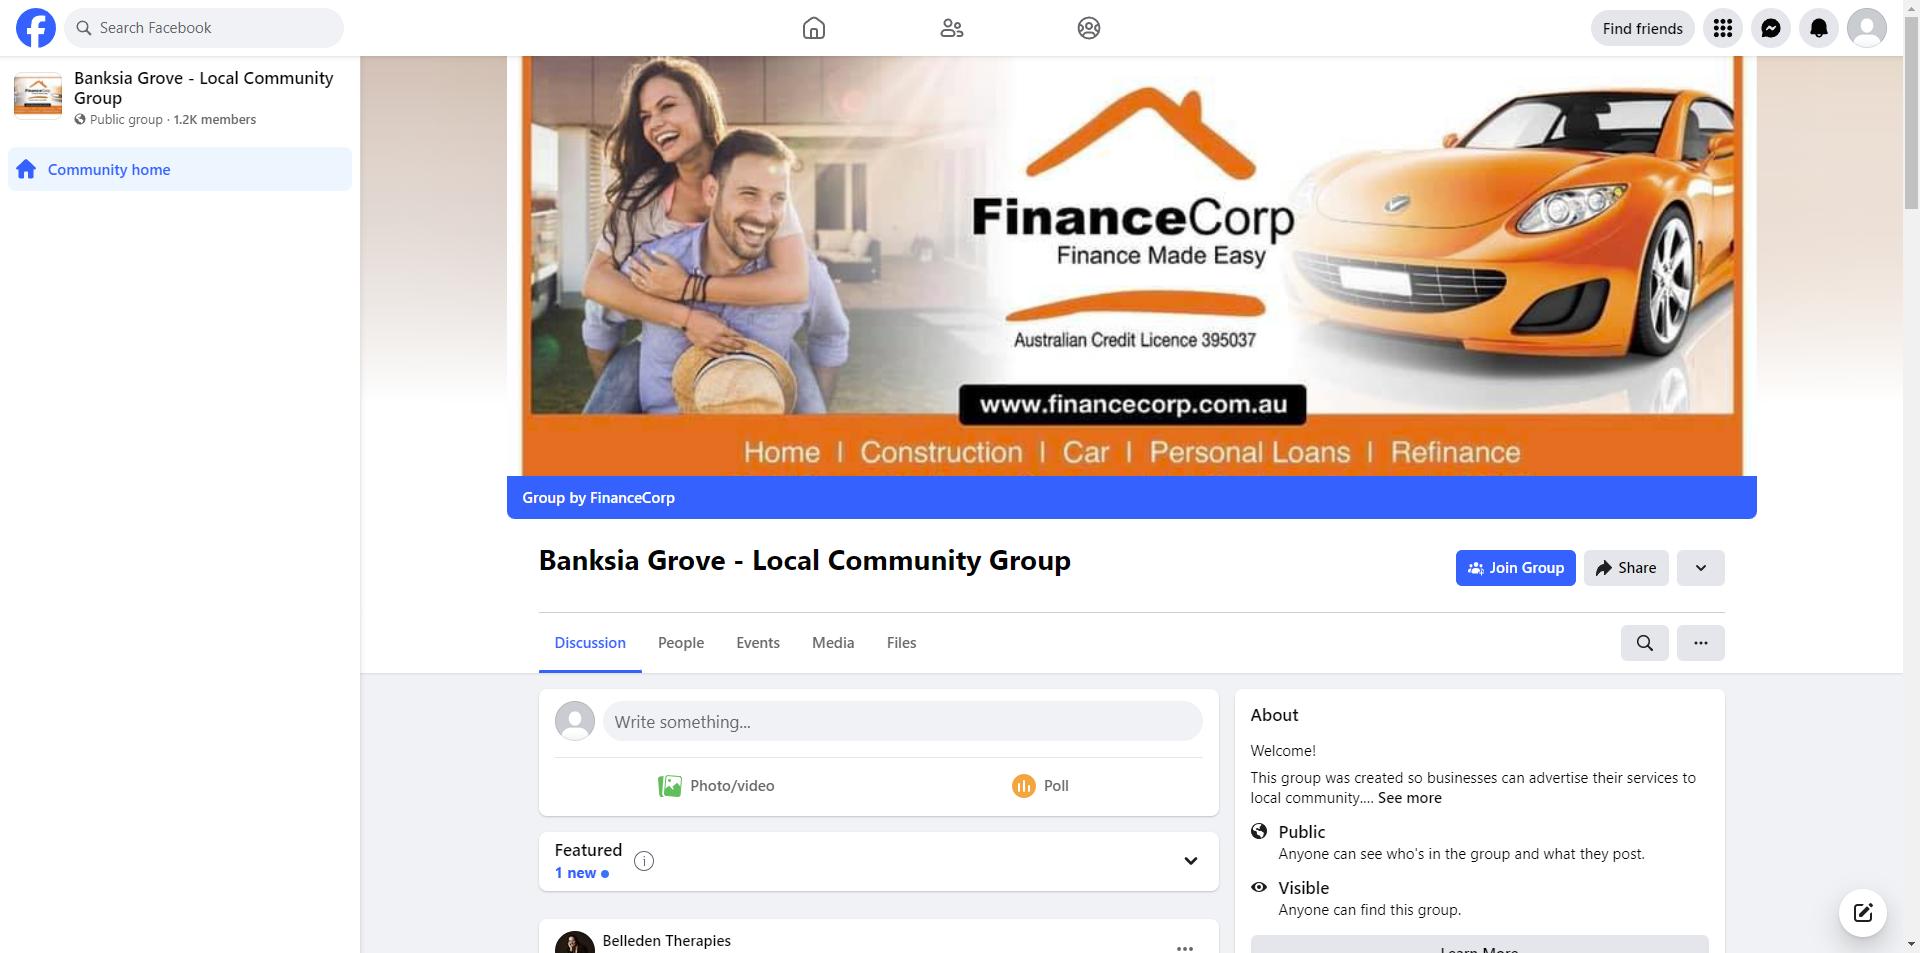 Banksia Grove - Local Community Group